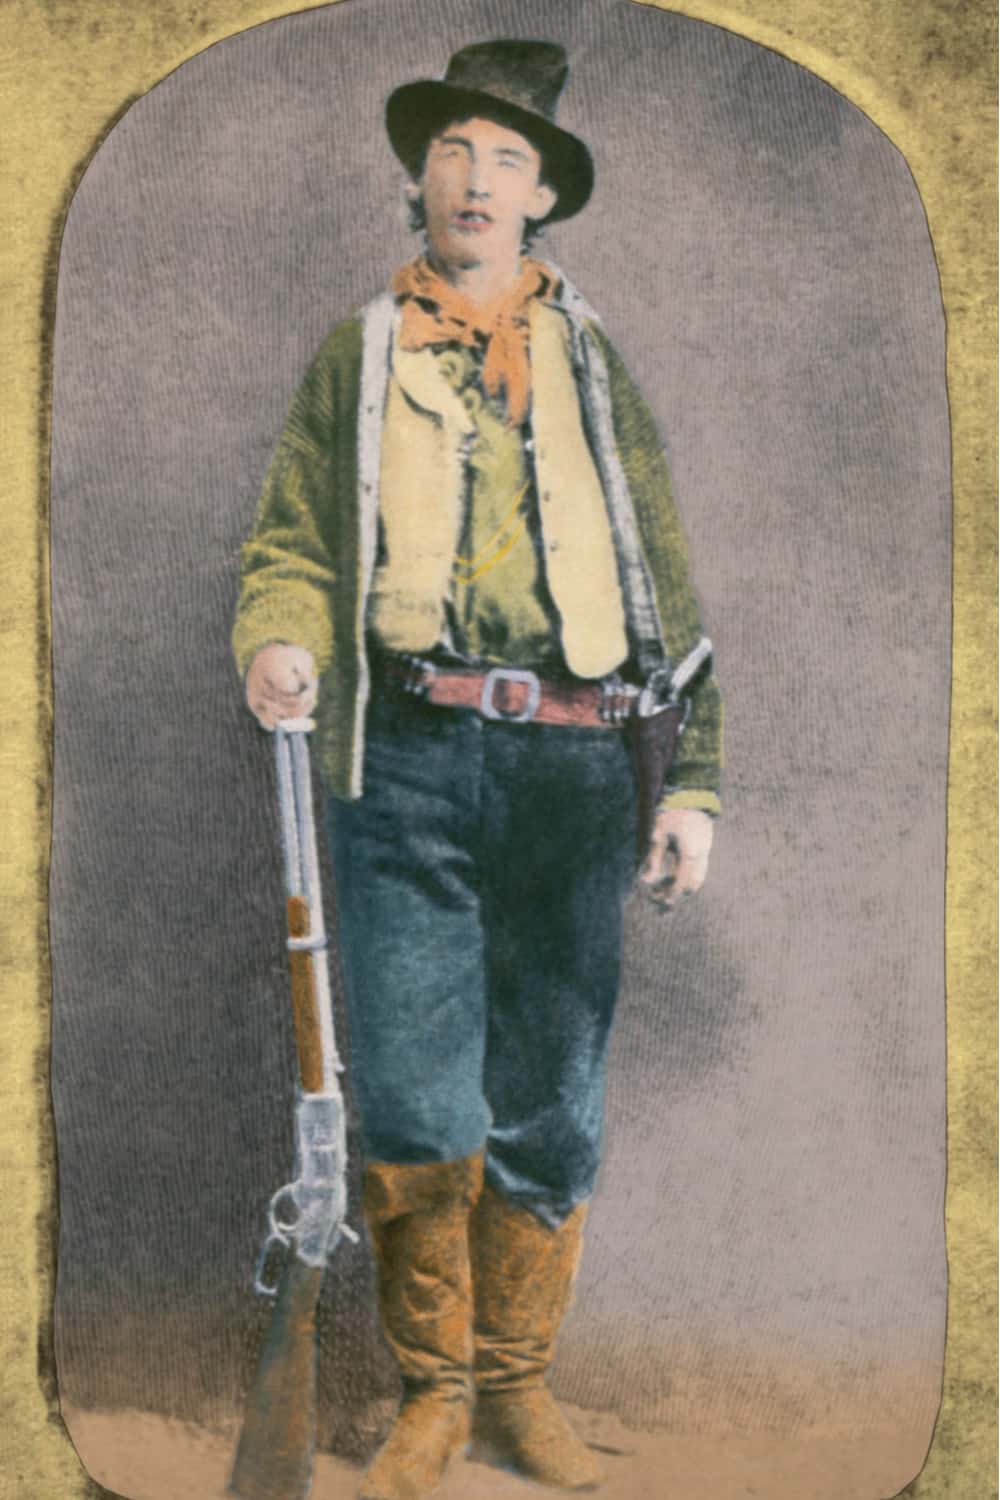 Billy the Kid – 1859 to 1881